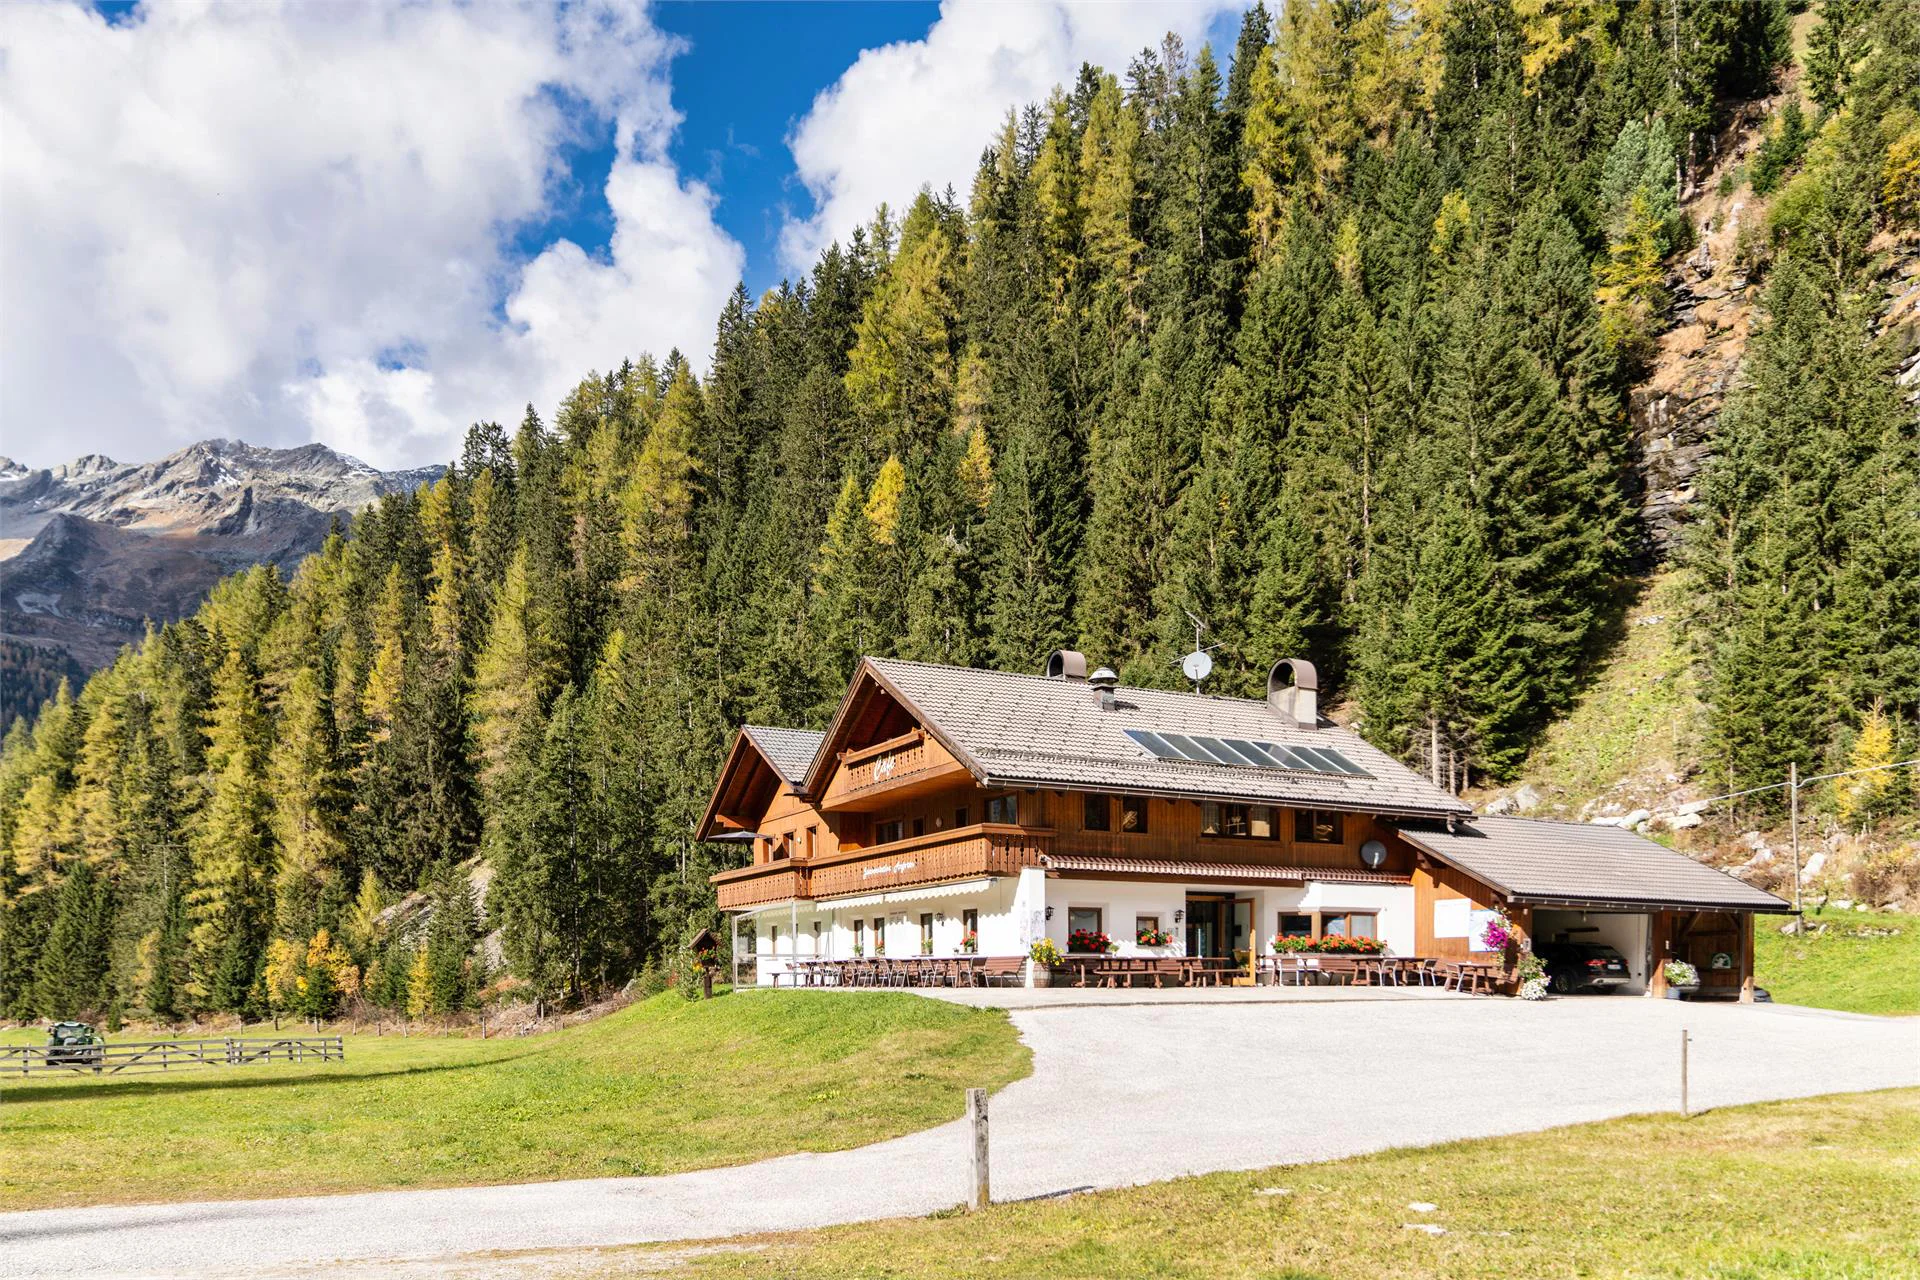 Angerer Campo Tures 7 suedtirol.info